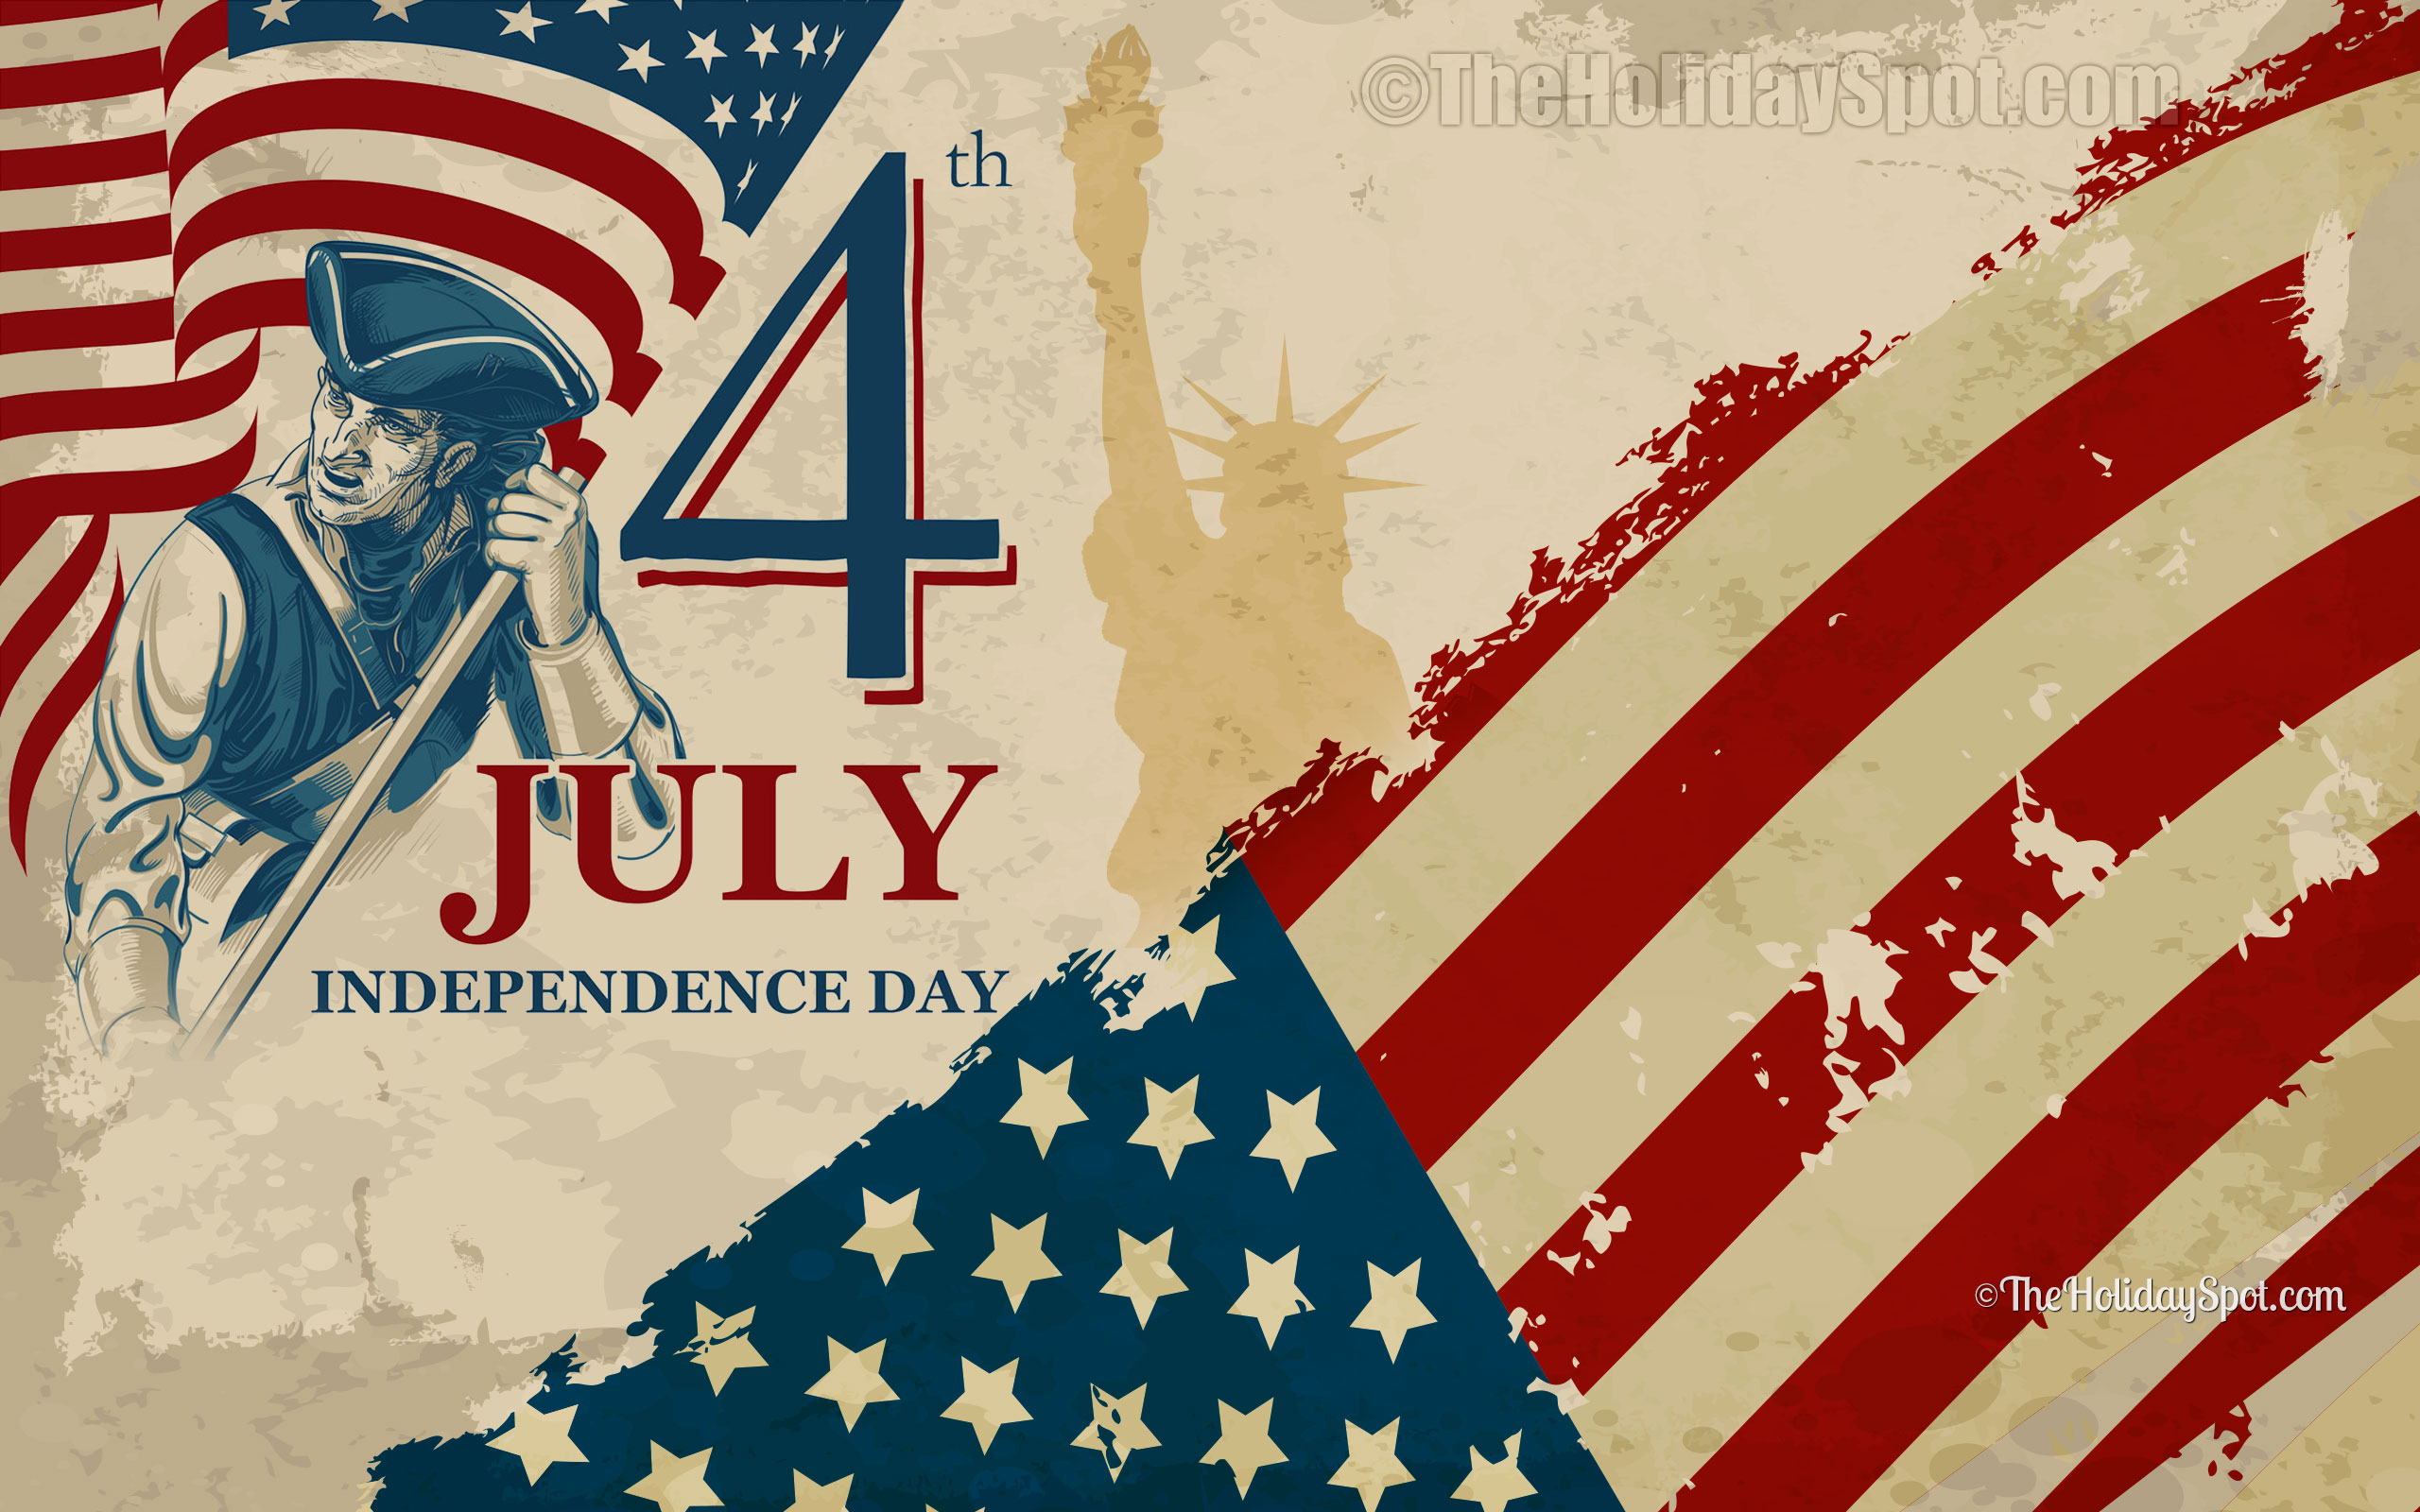 Free Military 4th Of July Wallpaper  Download in Illustrator EPS SVG  JPG PNG  Templatenet